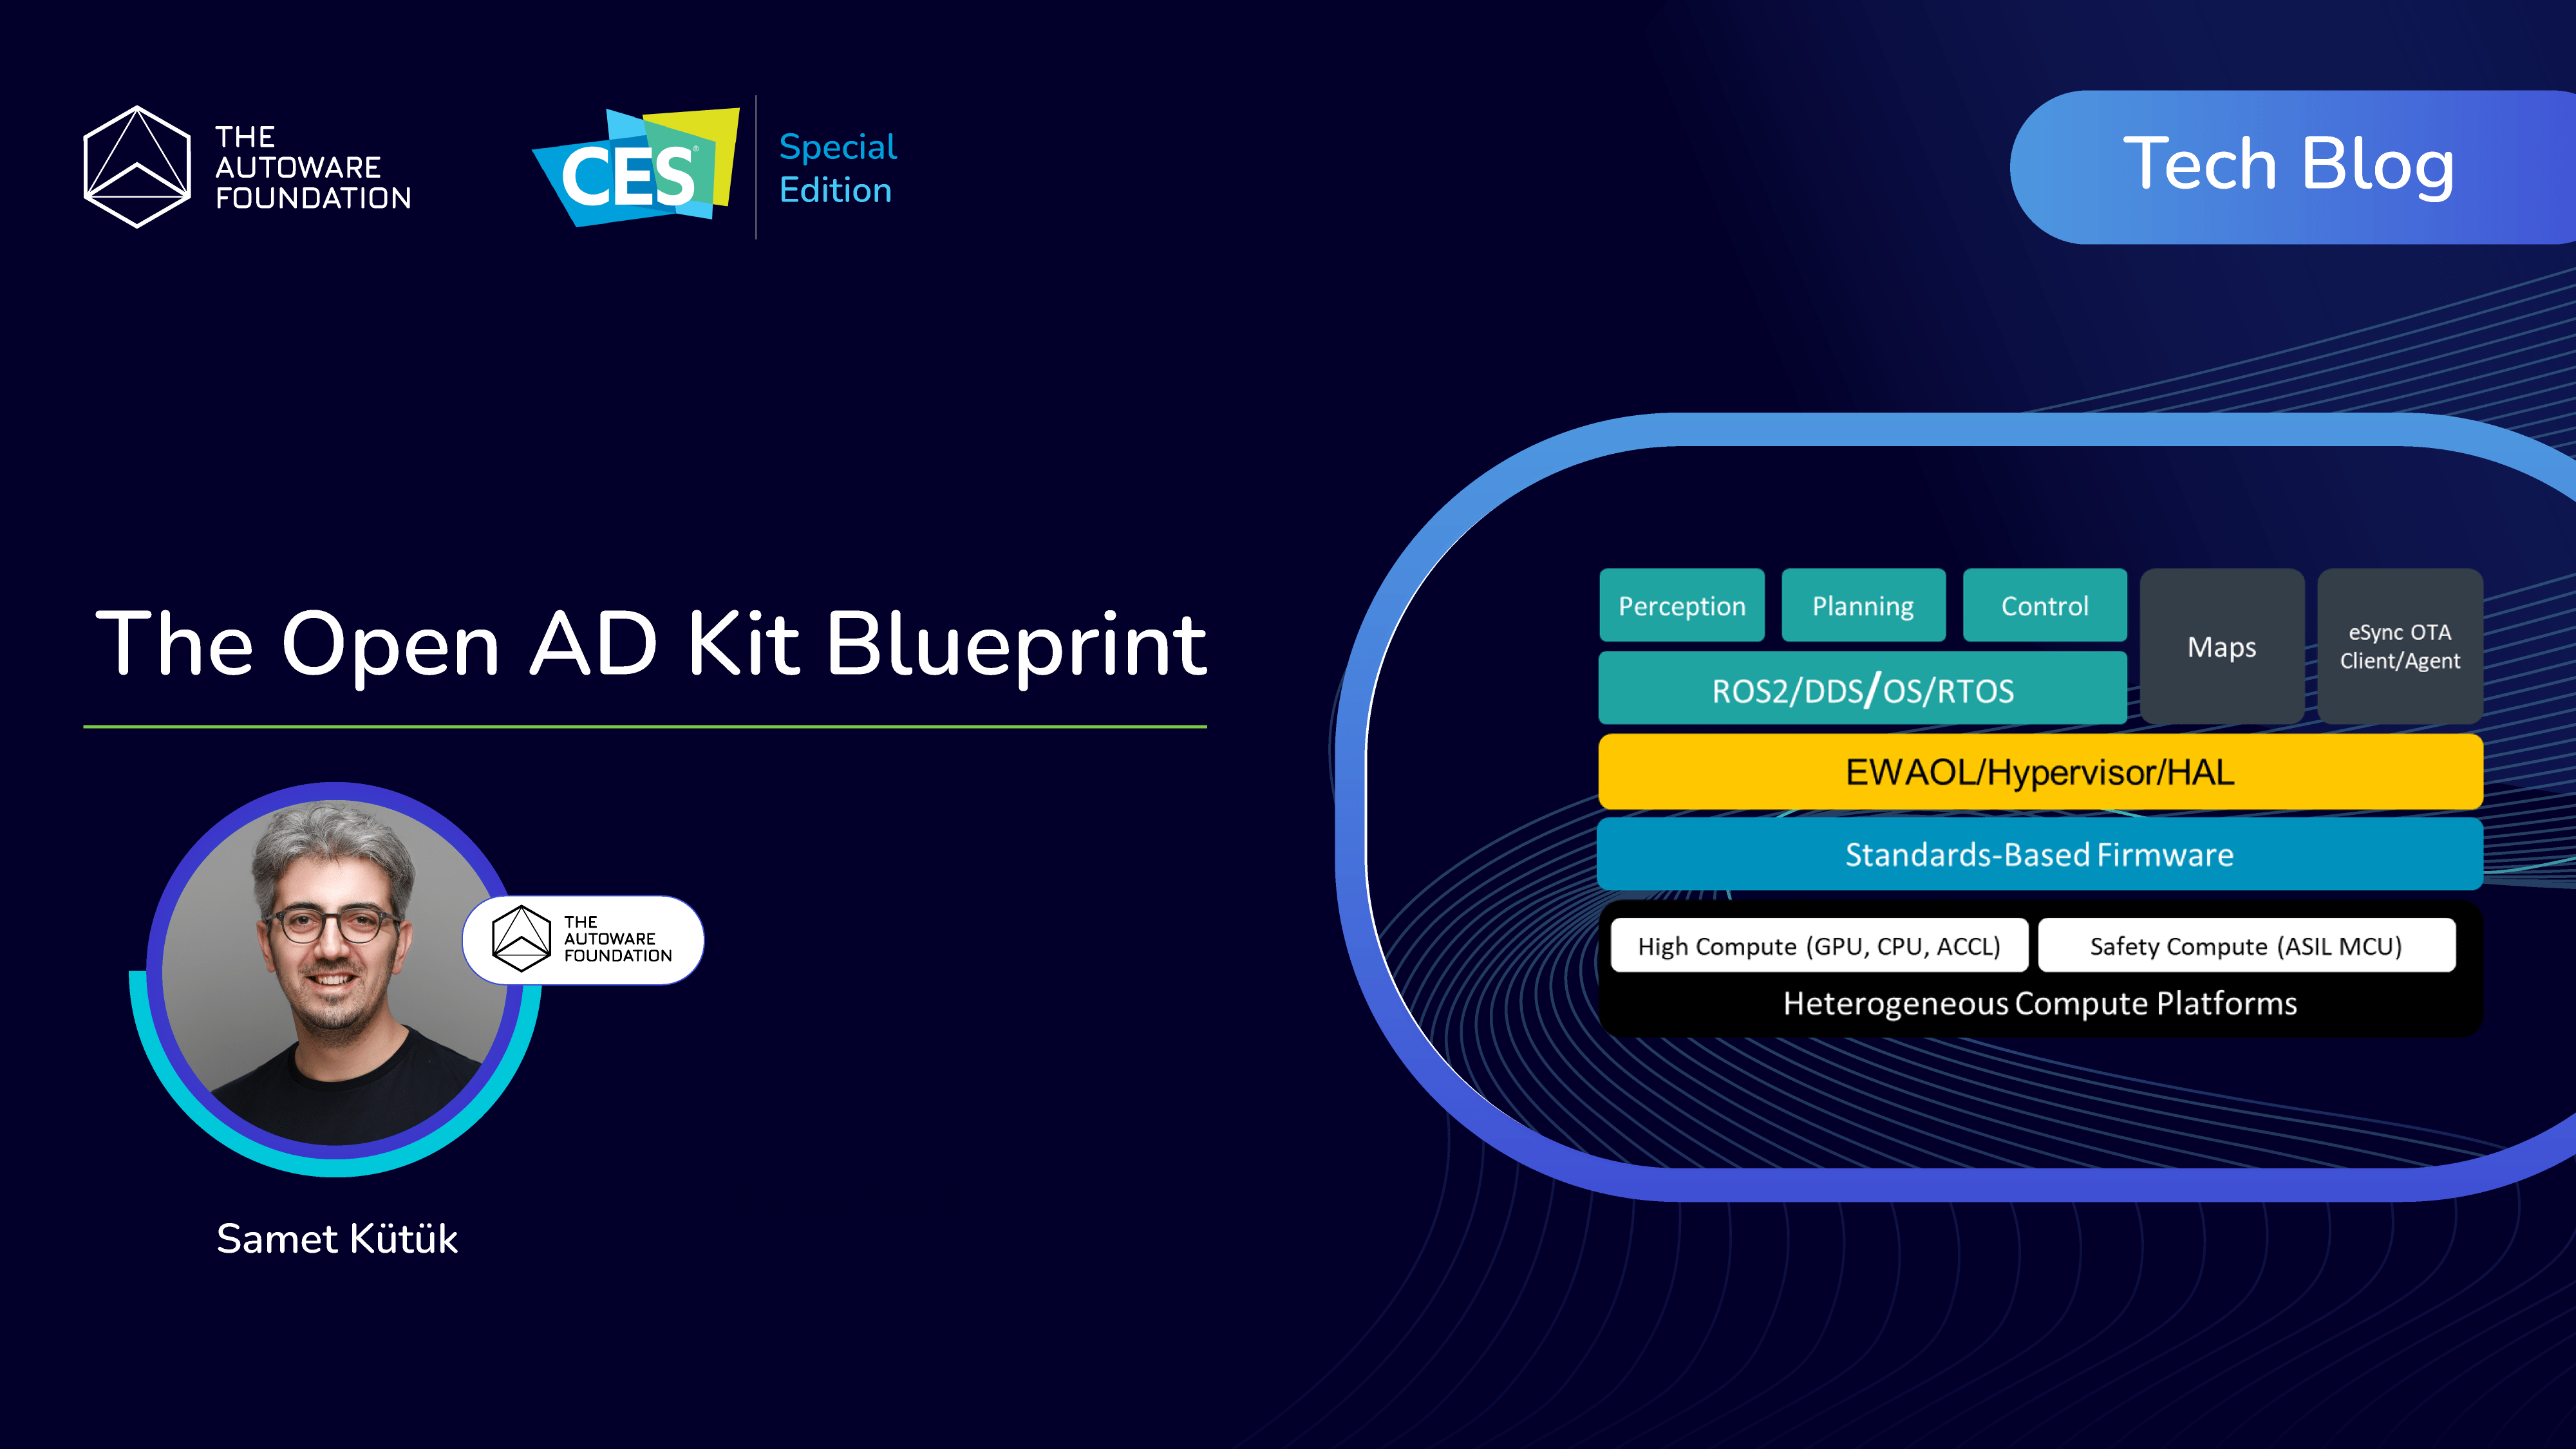 CES Special – The Open AD Kit Blueprint